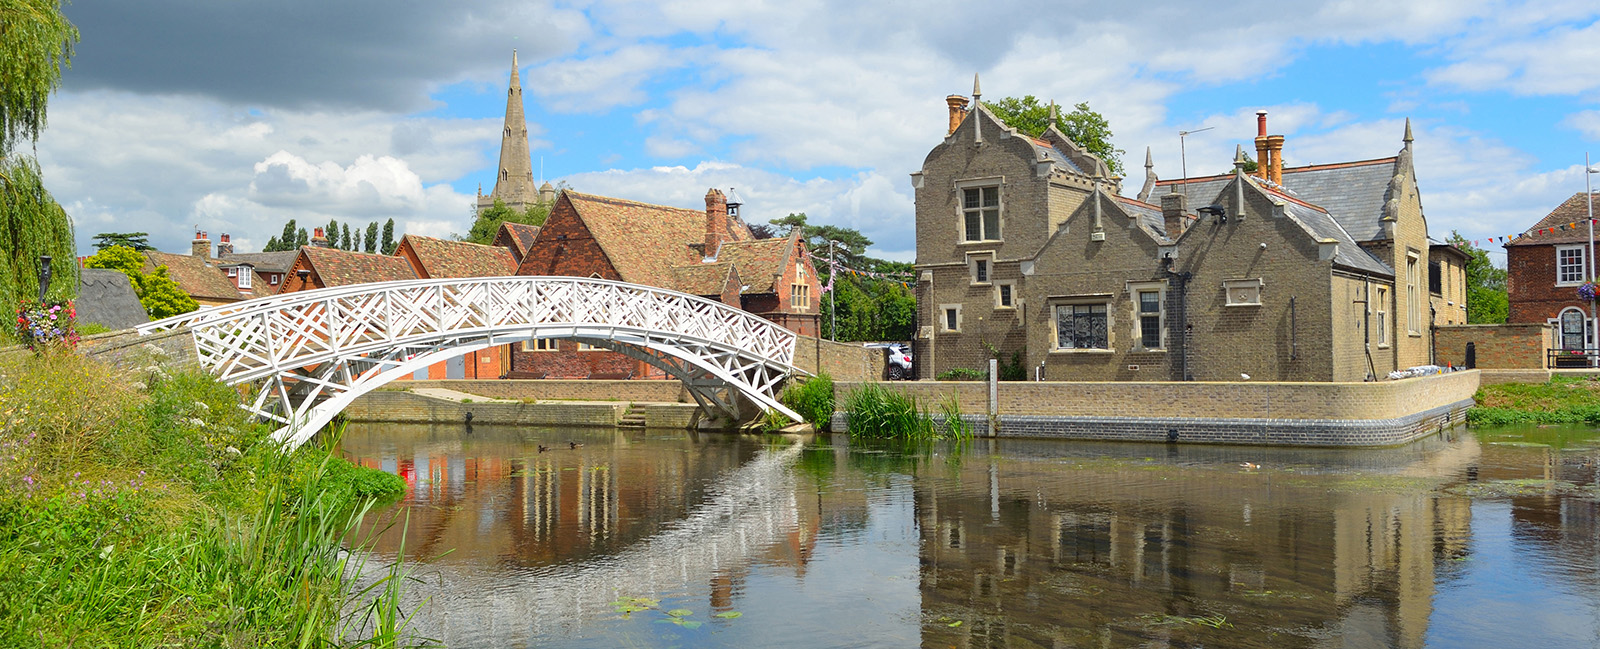 Chinese Bridge, Town Offices and the Causeway Godmanchester Cambridgeshire